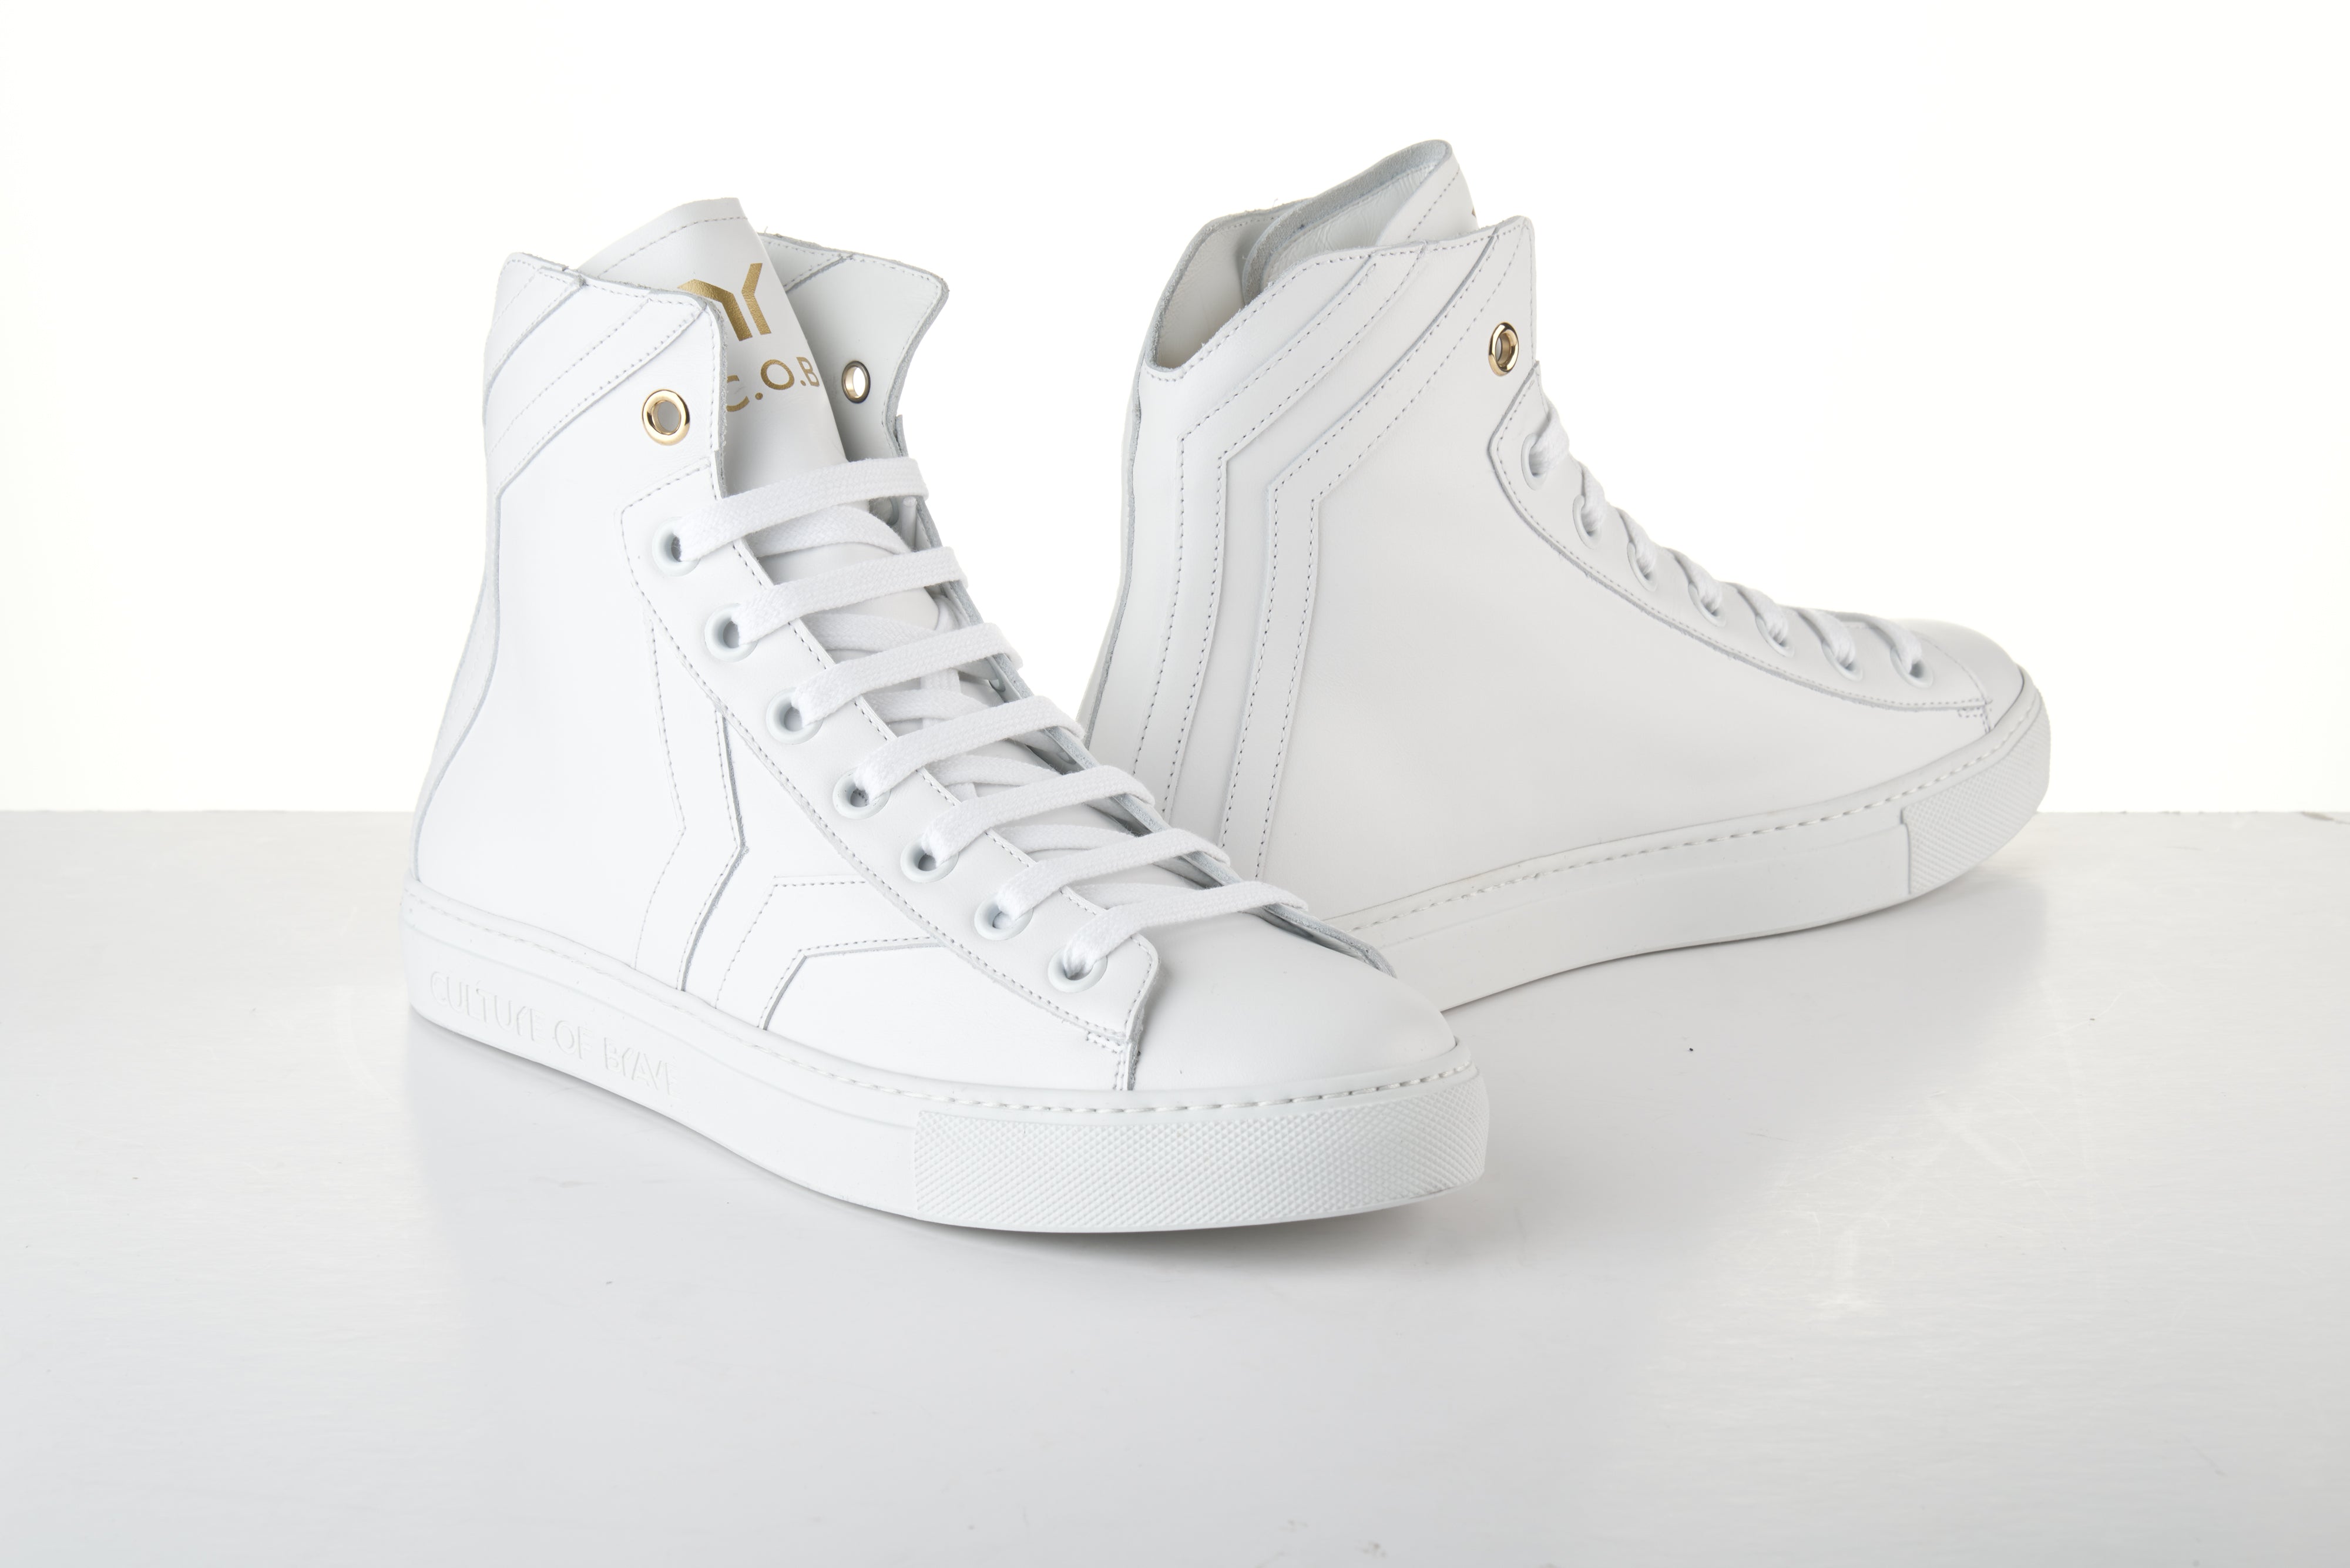 Resilient S13 Men White leather white wing mid cut